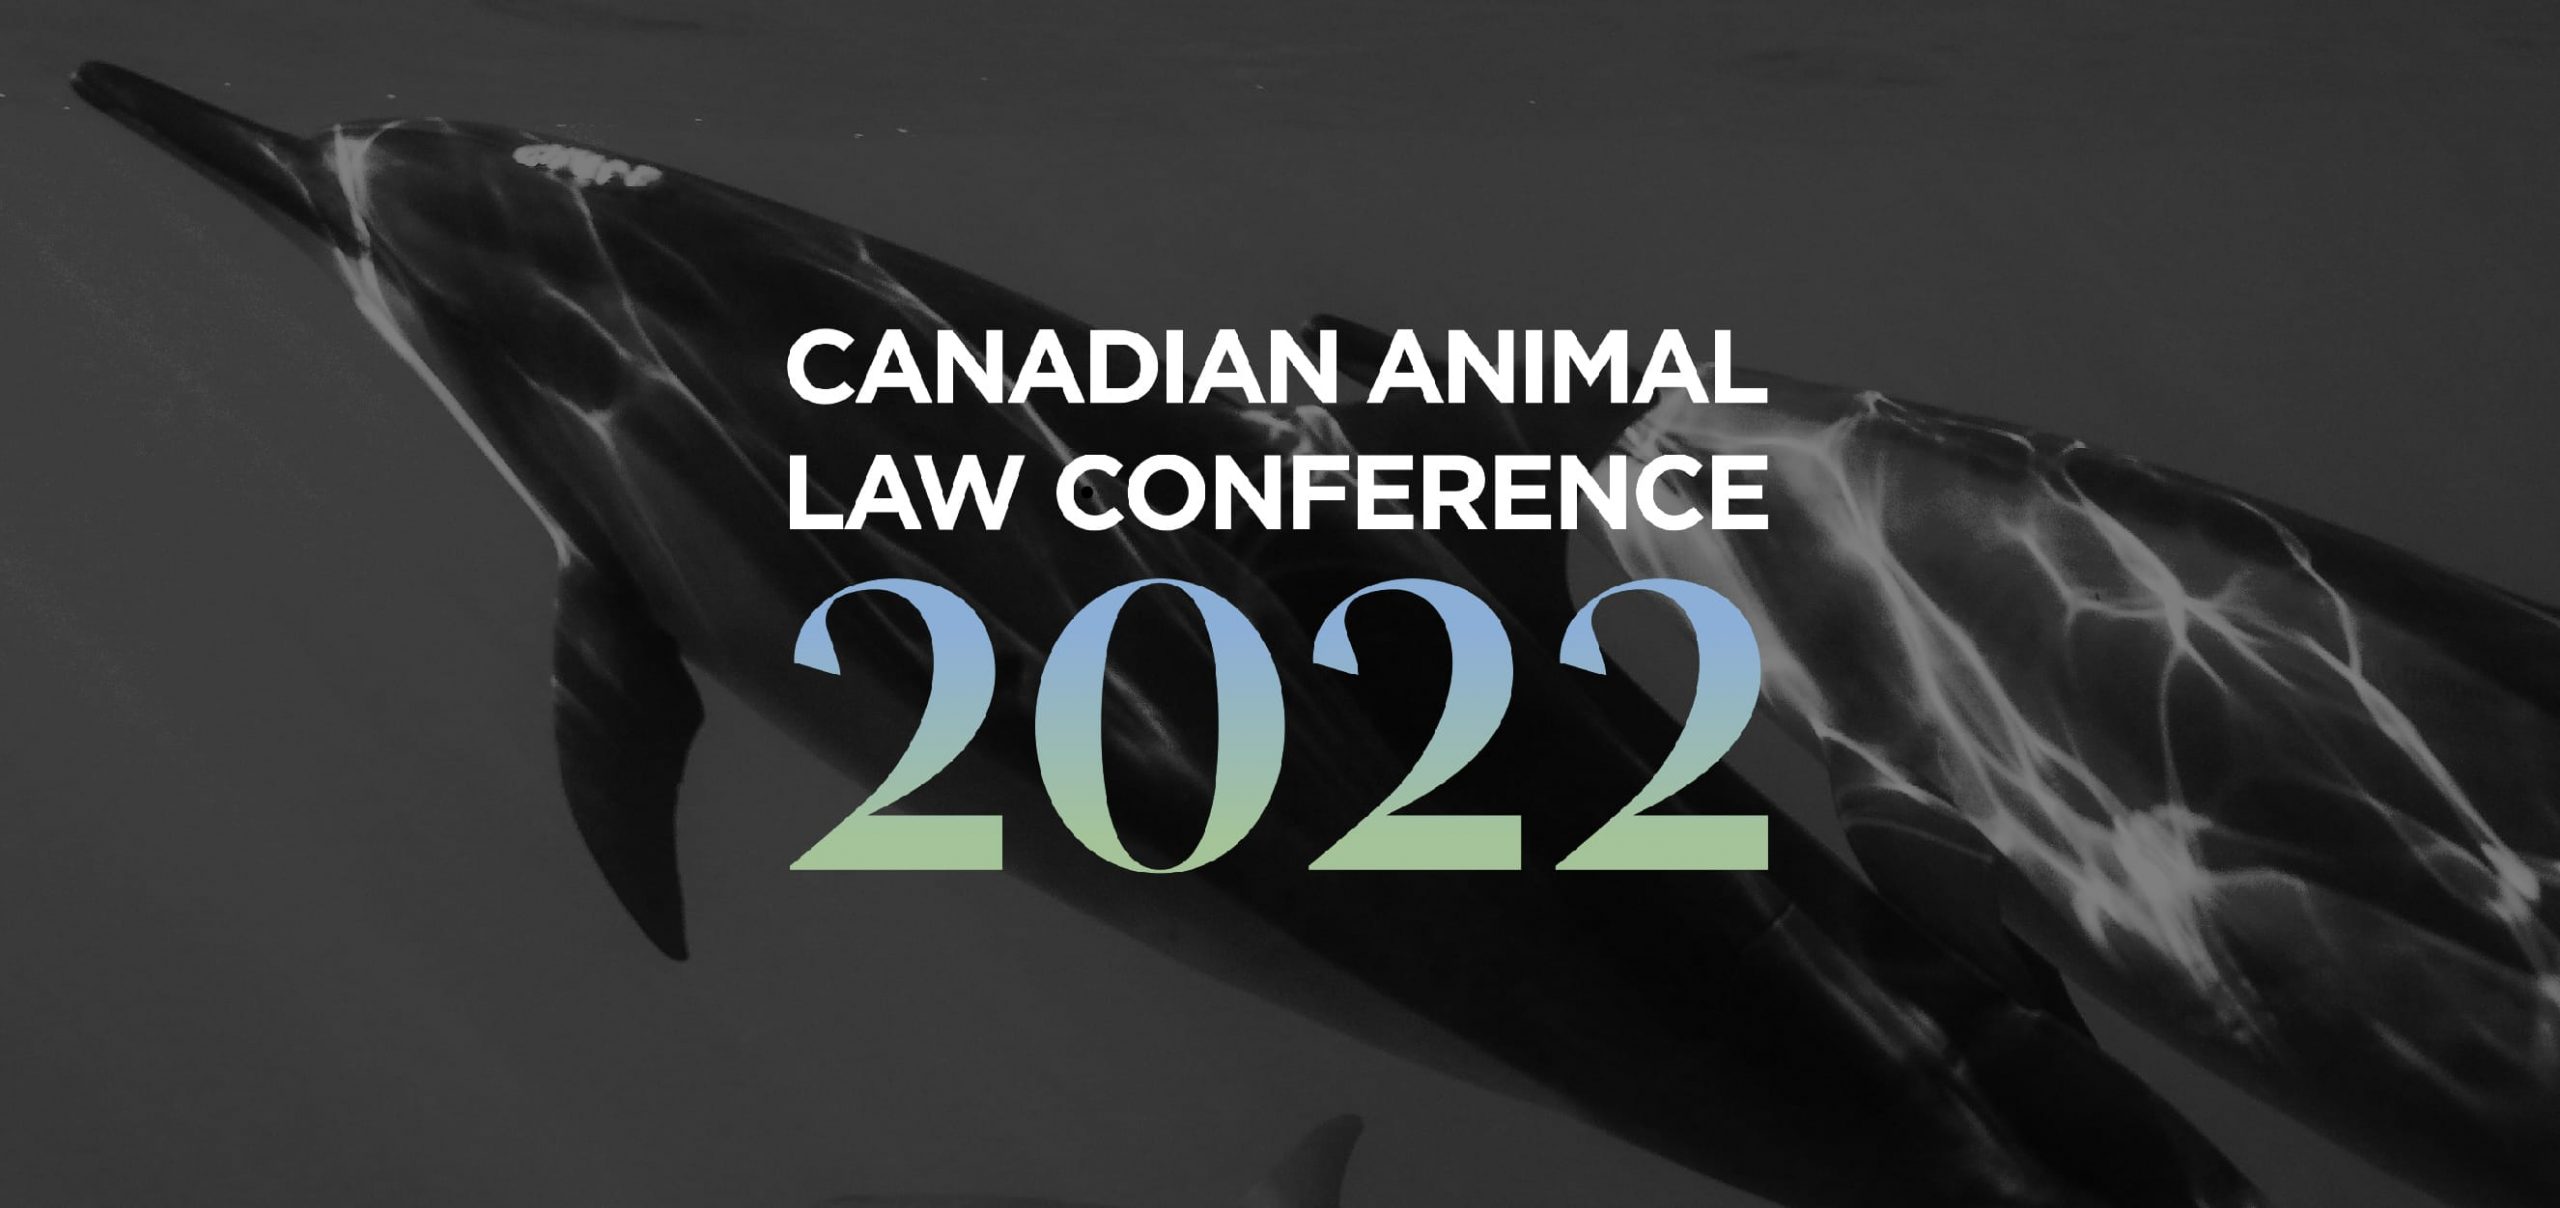 Image shows Canadian Animal Law Conference 2022 logo